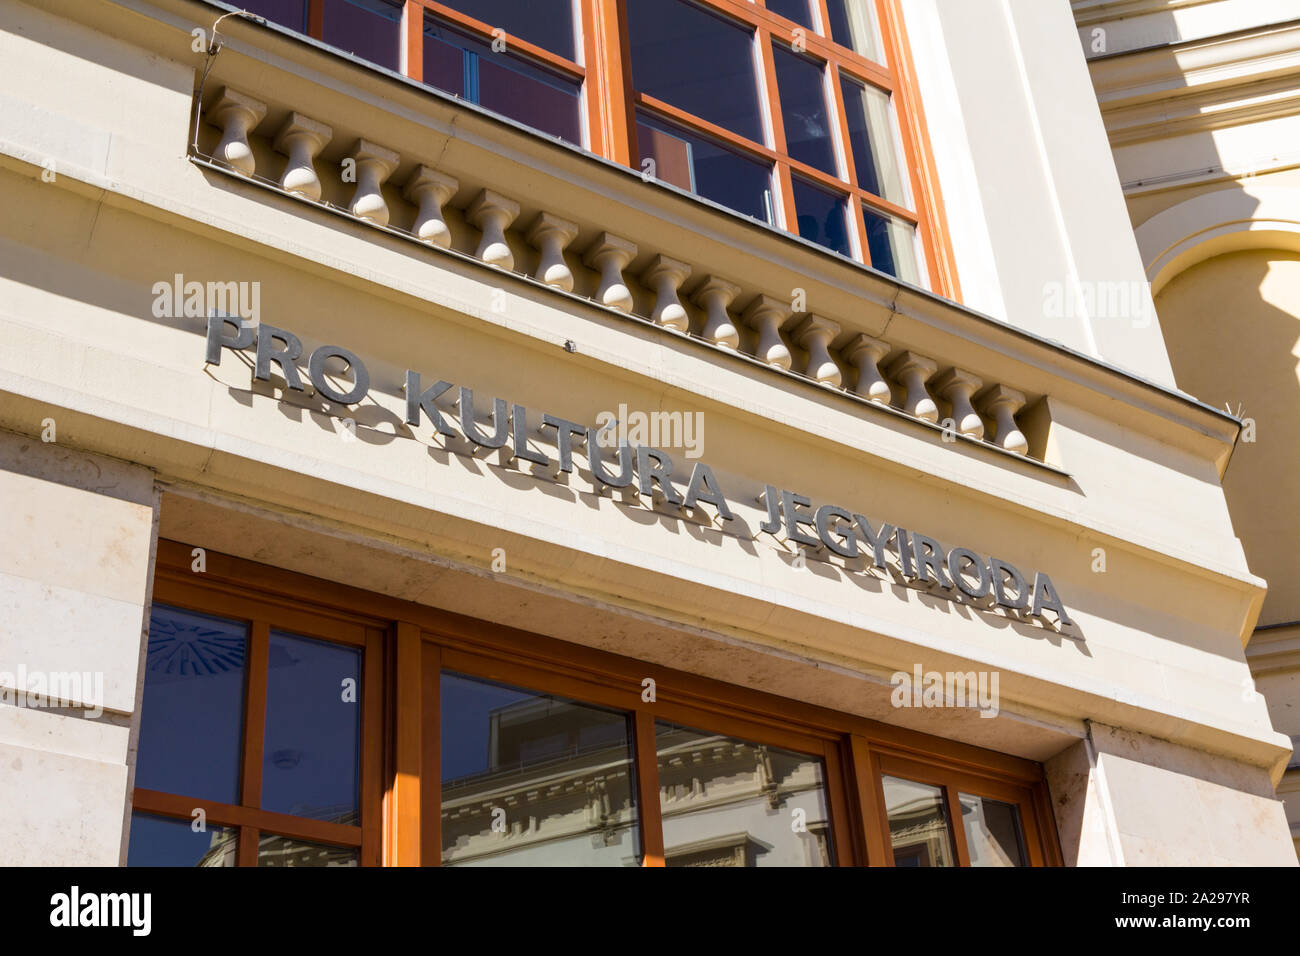 Pro Kultura Jegyiroda (Pro Culture Ticket Office) written on the front of Liszt Ferenc Cultural and Conference Centre Center, Sopron, Hungary Stock Photo